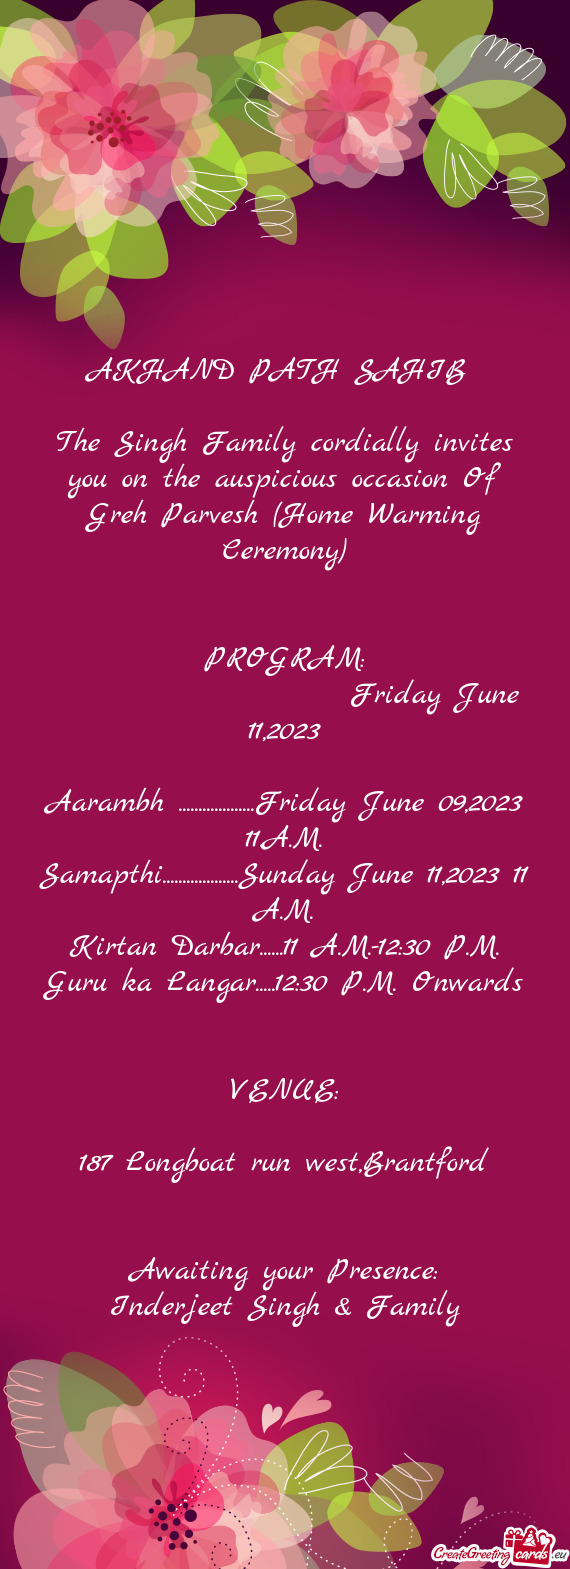 The Singh Family cordially invites you on the auspicious occasion Of Greh Parvesh (Home Warming Cere